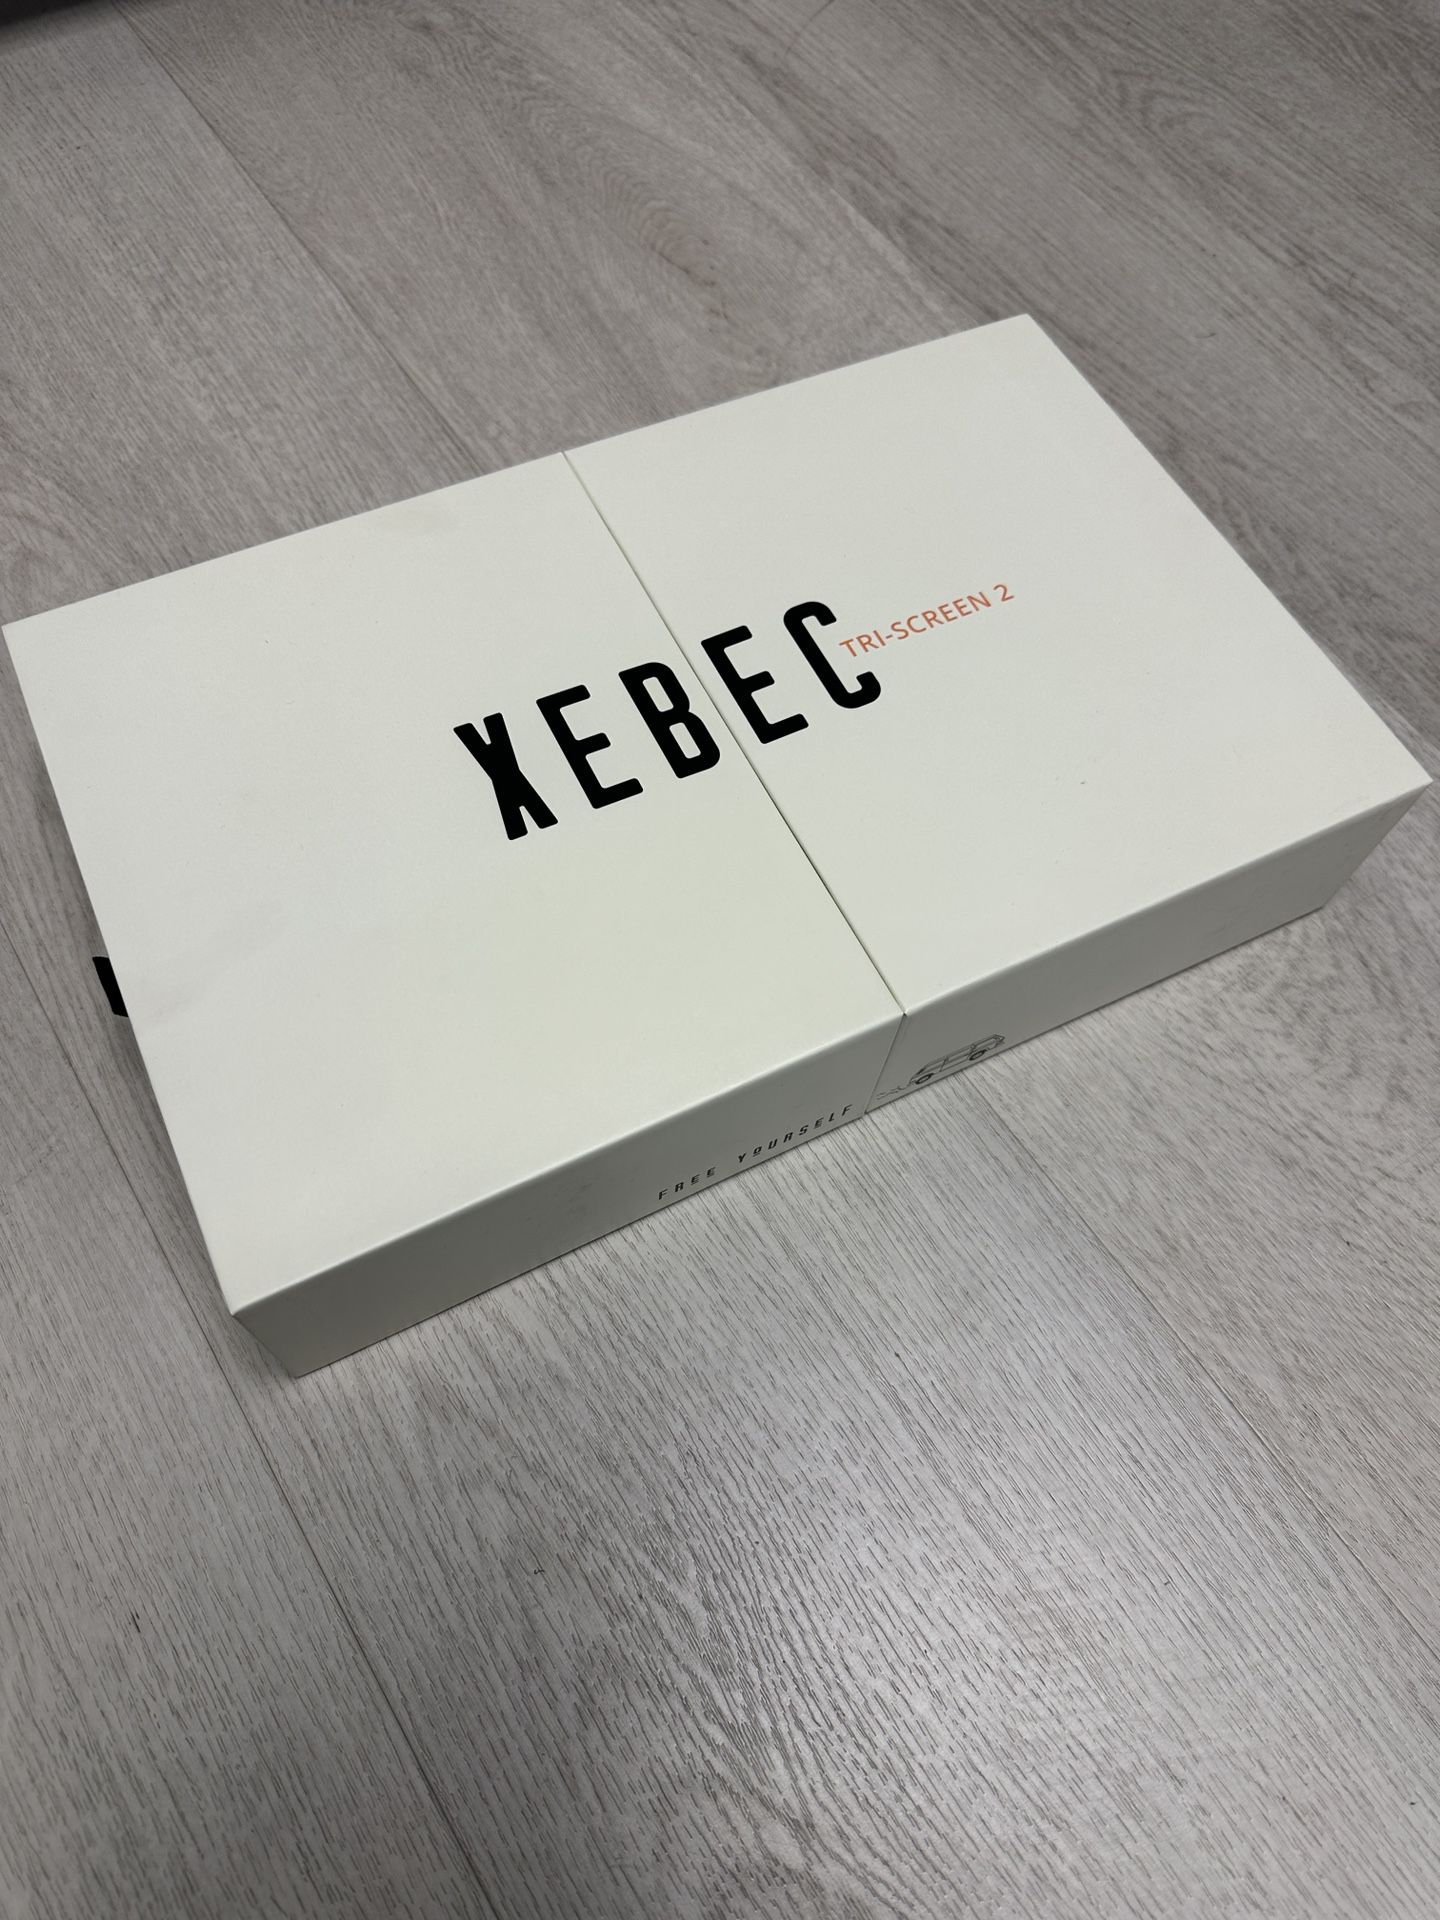 Xebec tri-screen and Adapter  